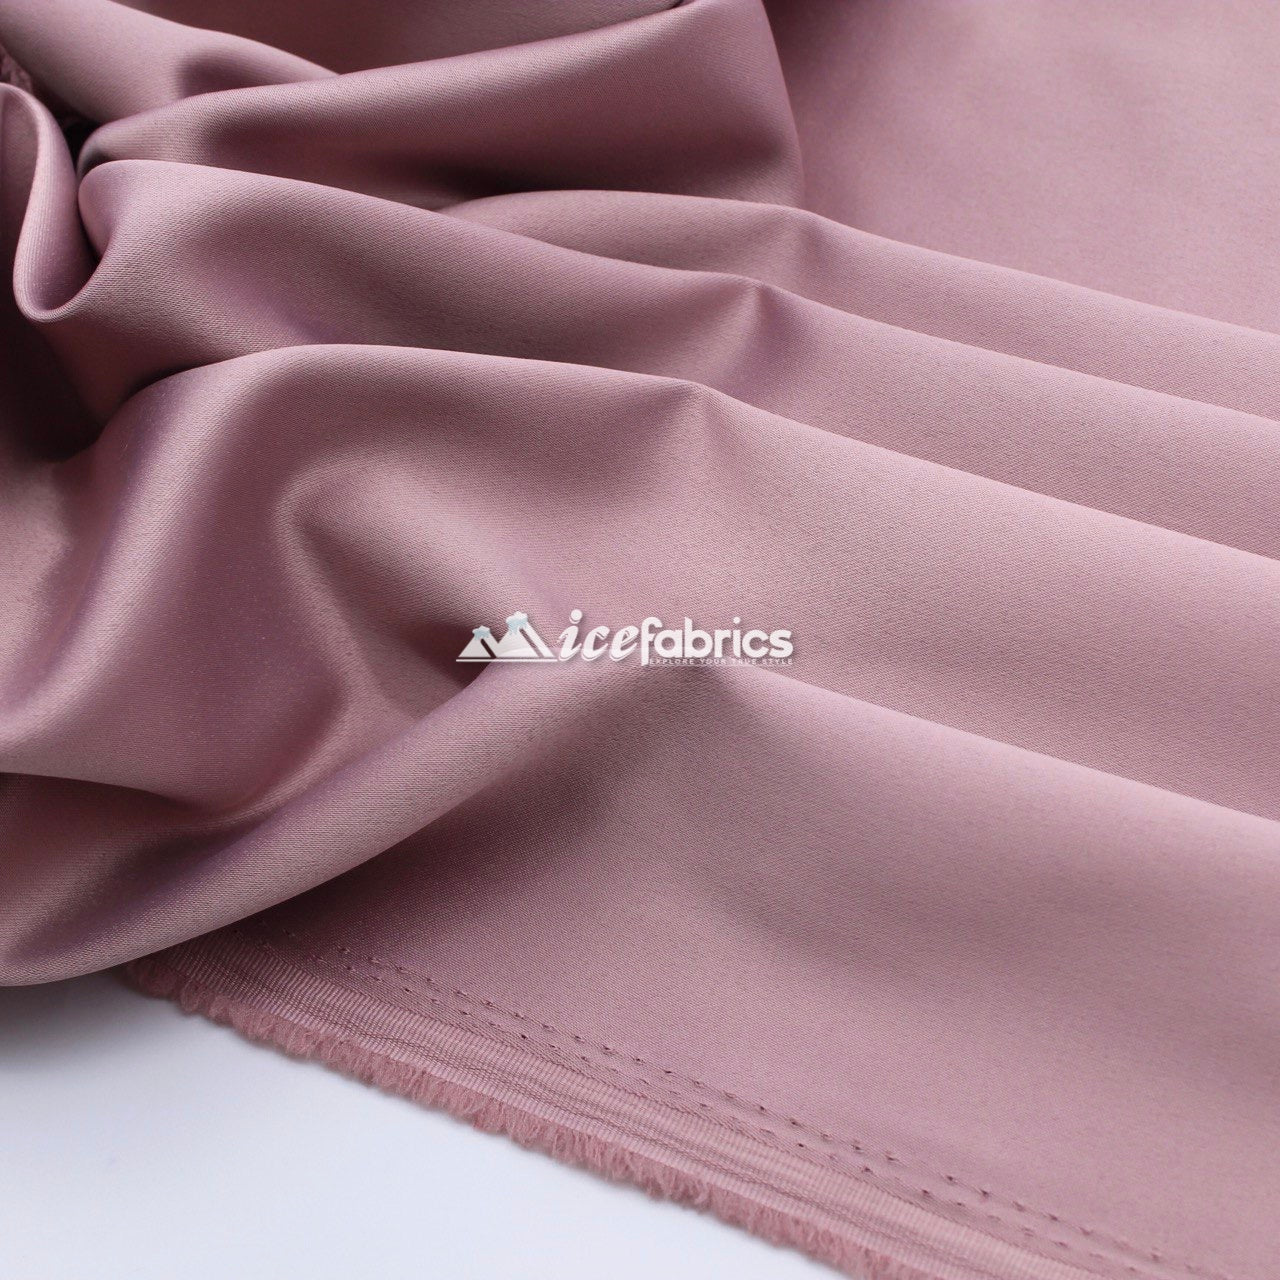 Armani Thick Solid Color Silky Stretch Satin Fabric Sold By The YardSatin FabricICE FABRICSICE FABRICSMauveArmani Thick Solid Color Silky Stretch Satin Fabric Sold By The Yard ICE FABRICS Dusty Rose